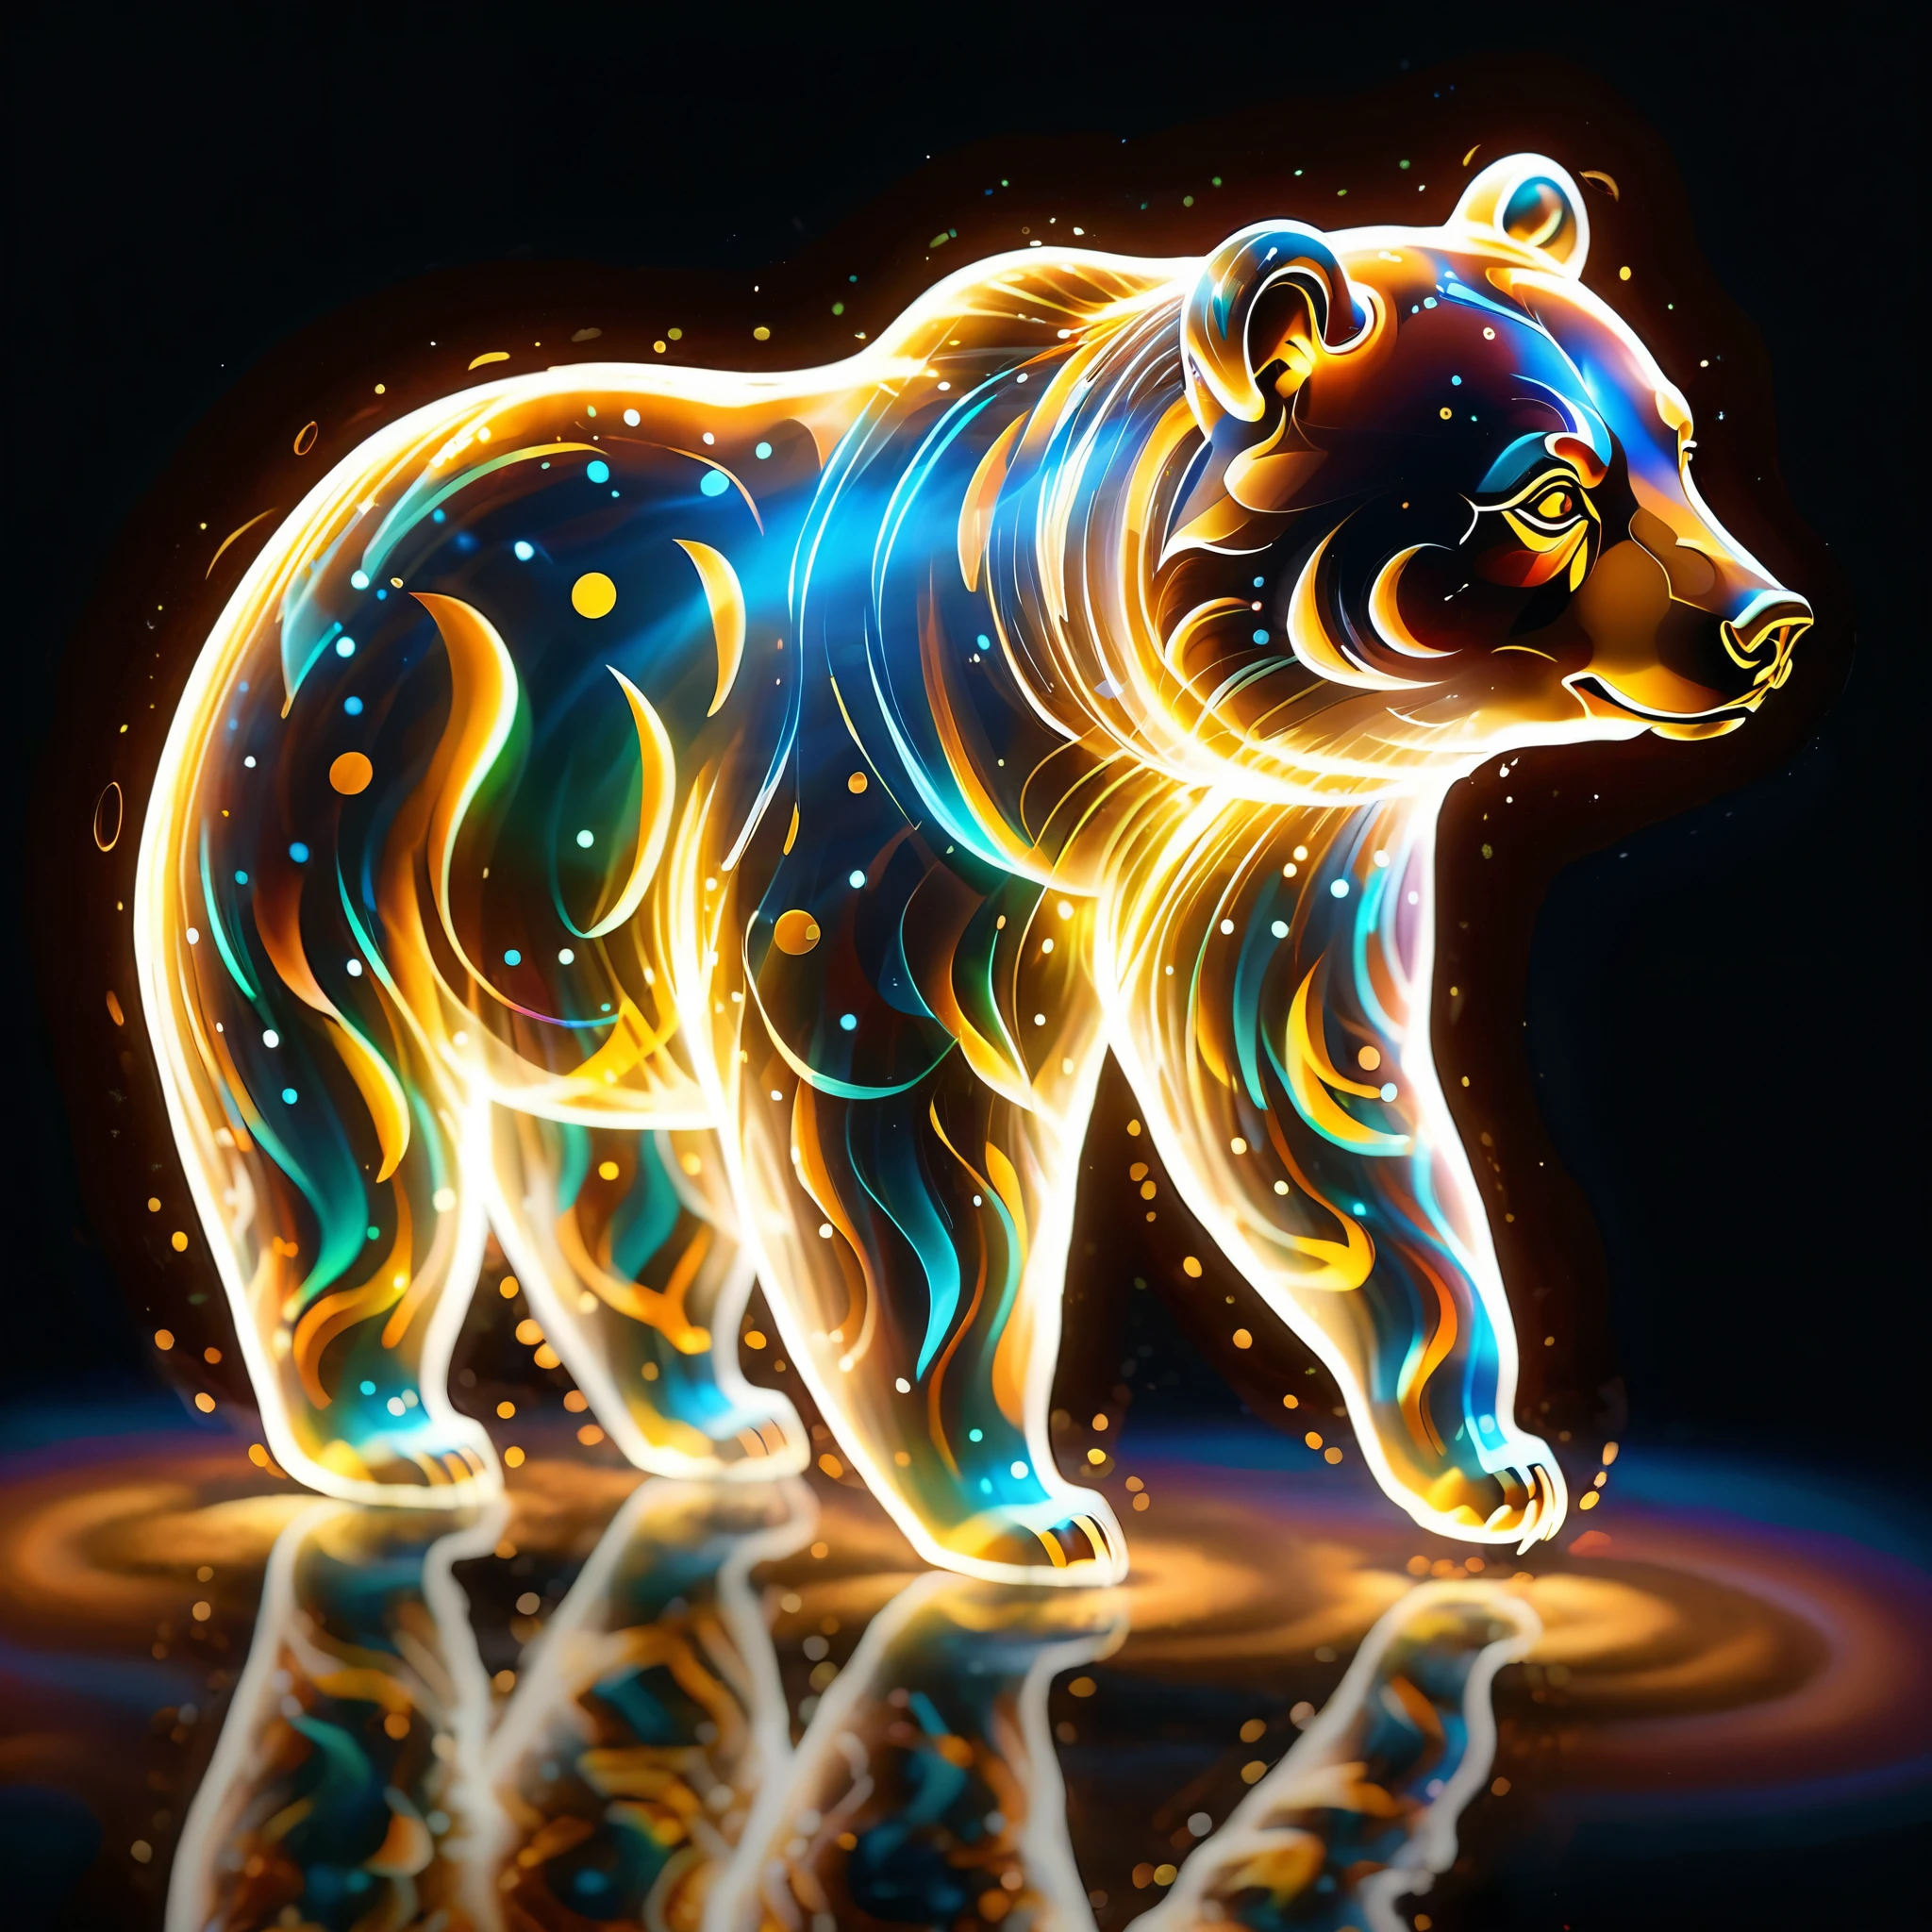 Glowing energy forms the shapes of a cute bear, forming intricate patterns that seem to ripple and shift with the passage of time.